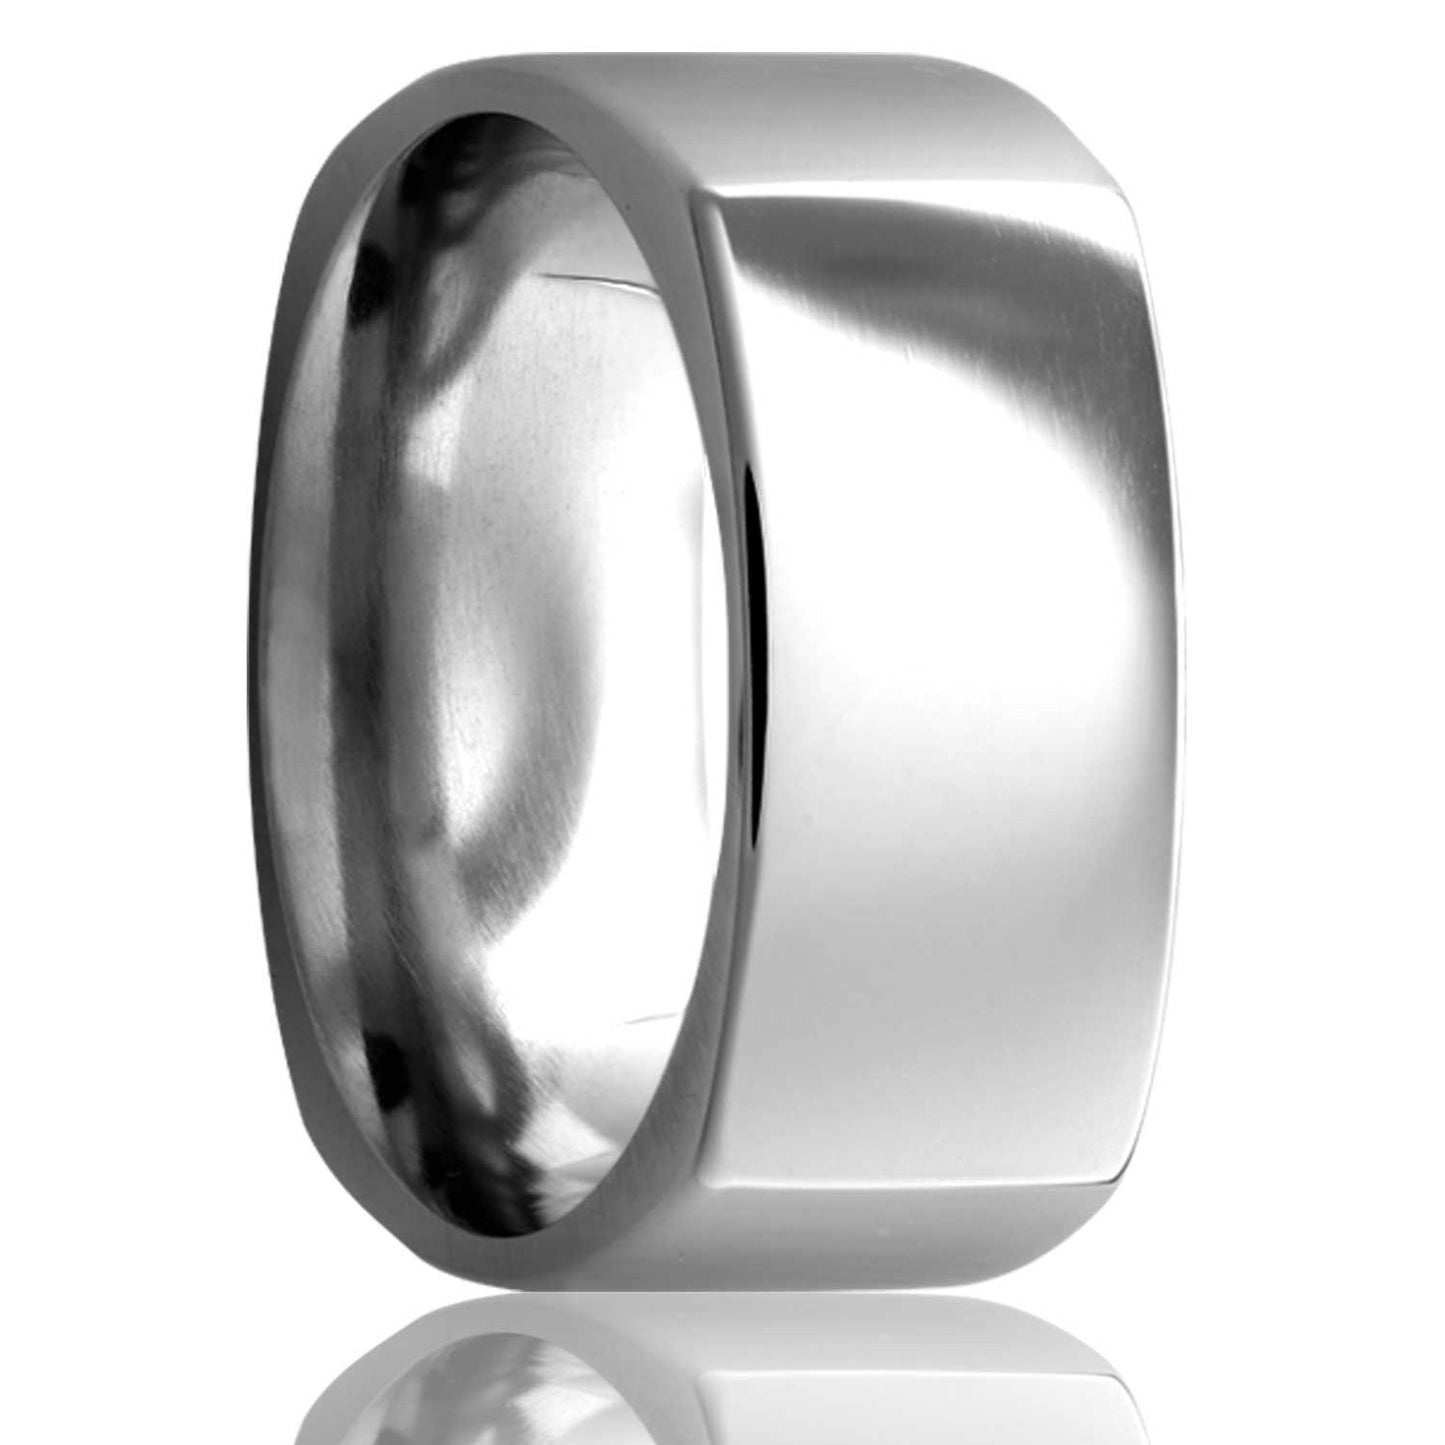 A square shaped platinum wedding band displayed on a neutral white background.